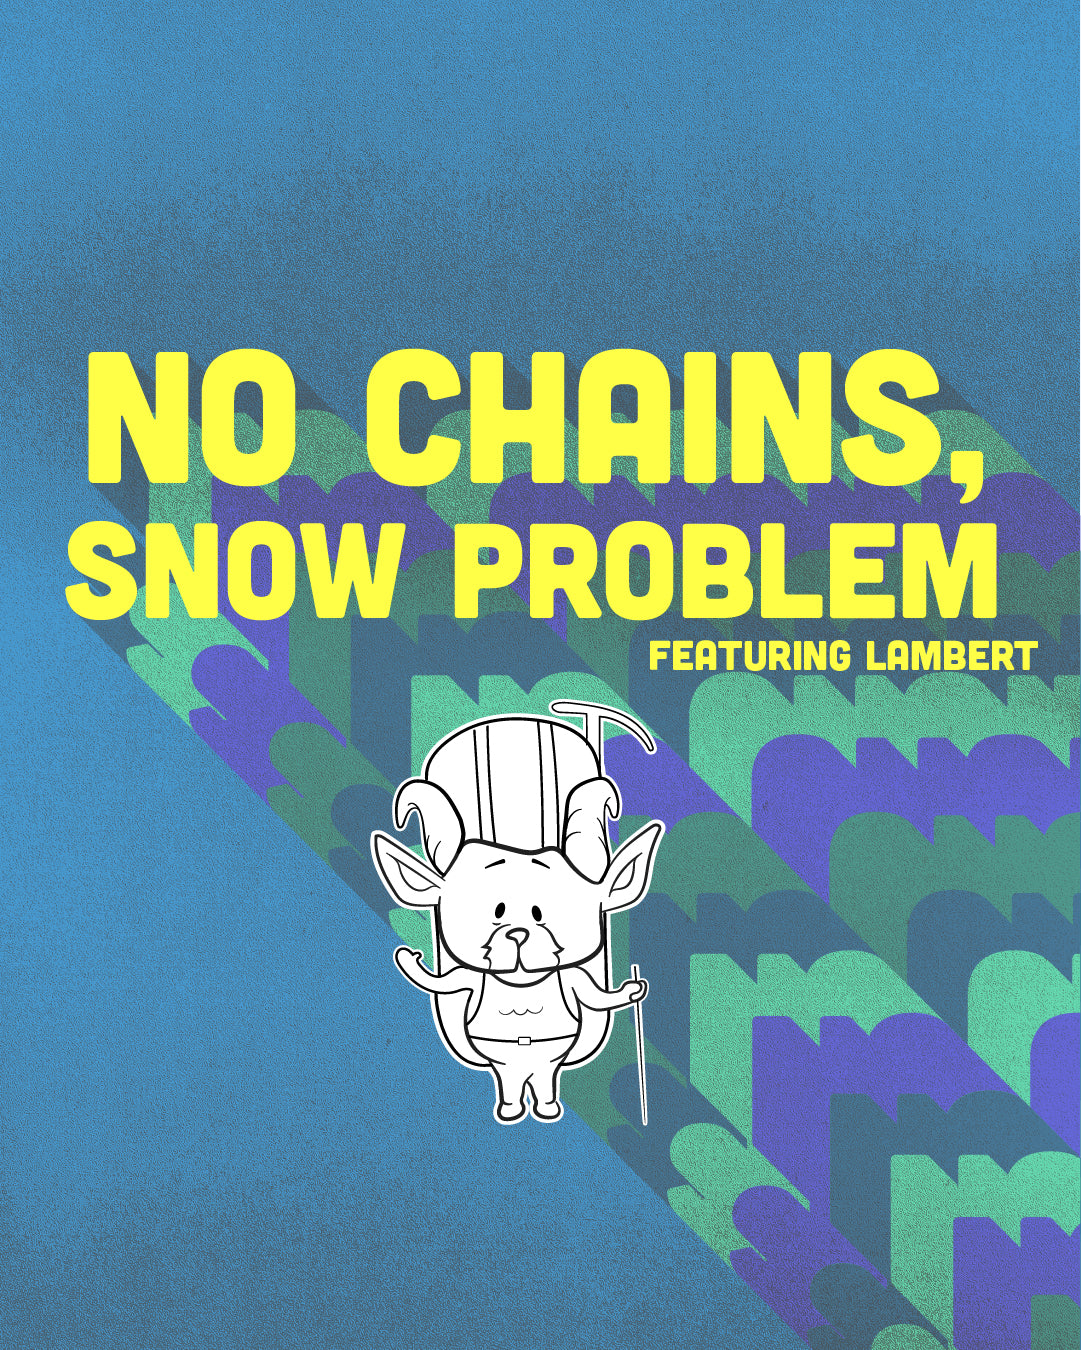 Title Page - No Chains, Snow Problem, The Adventures Of Lambert Comic Series | TRVRS Outdoors